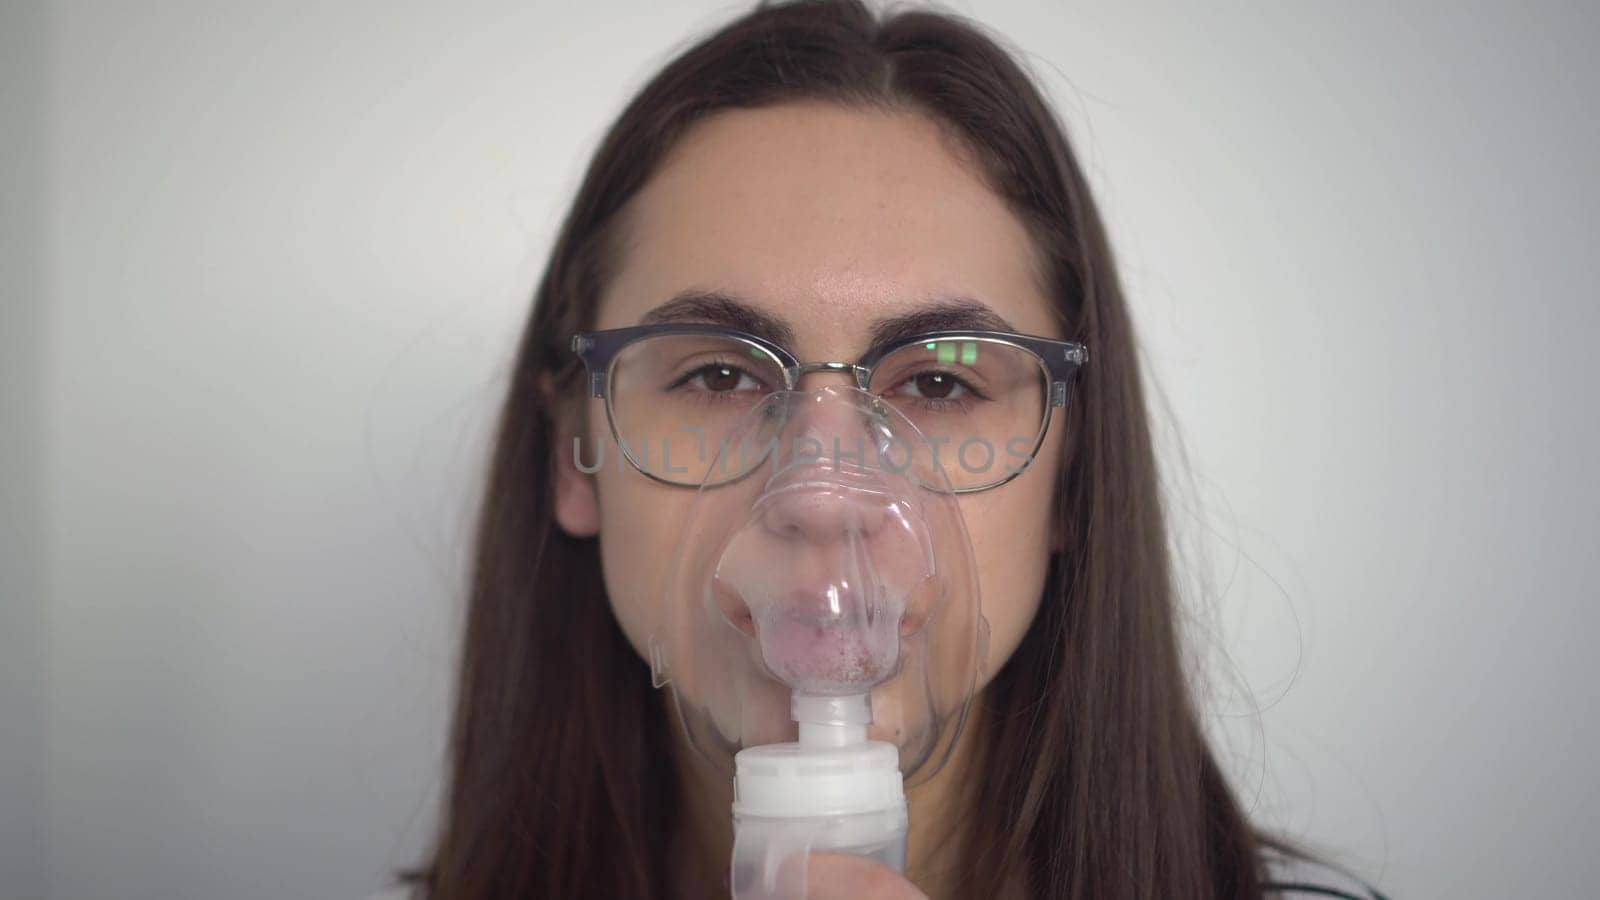 A young woman breathes through an inhaler mask closeup. A girl in glasses with an oxygen mask is being treated for a respiratory infection. by Puzankov